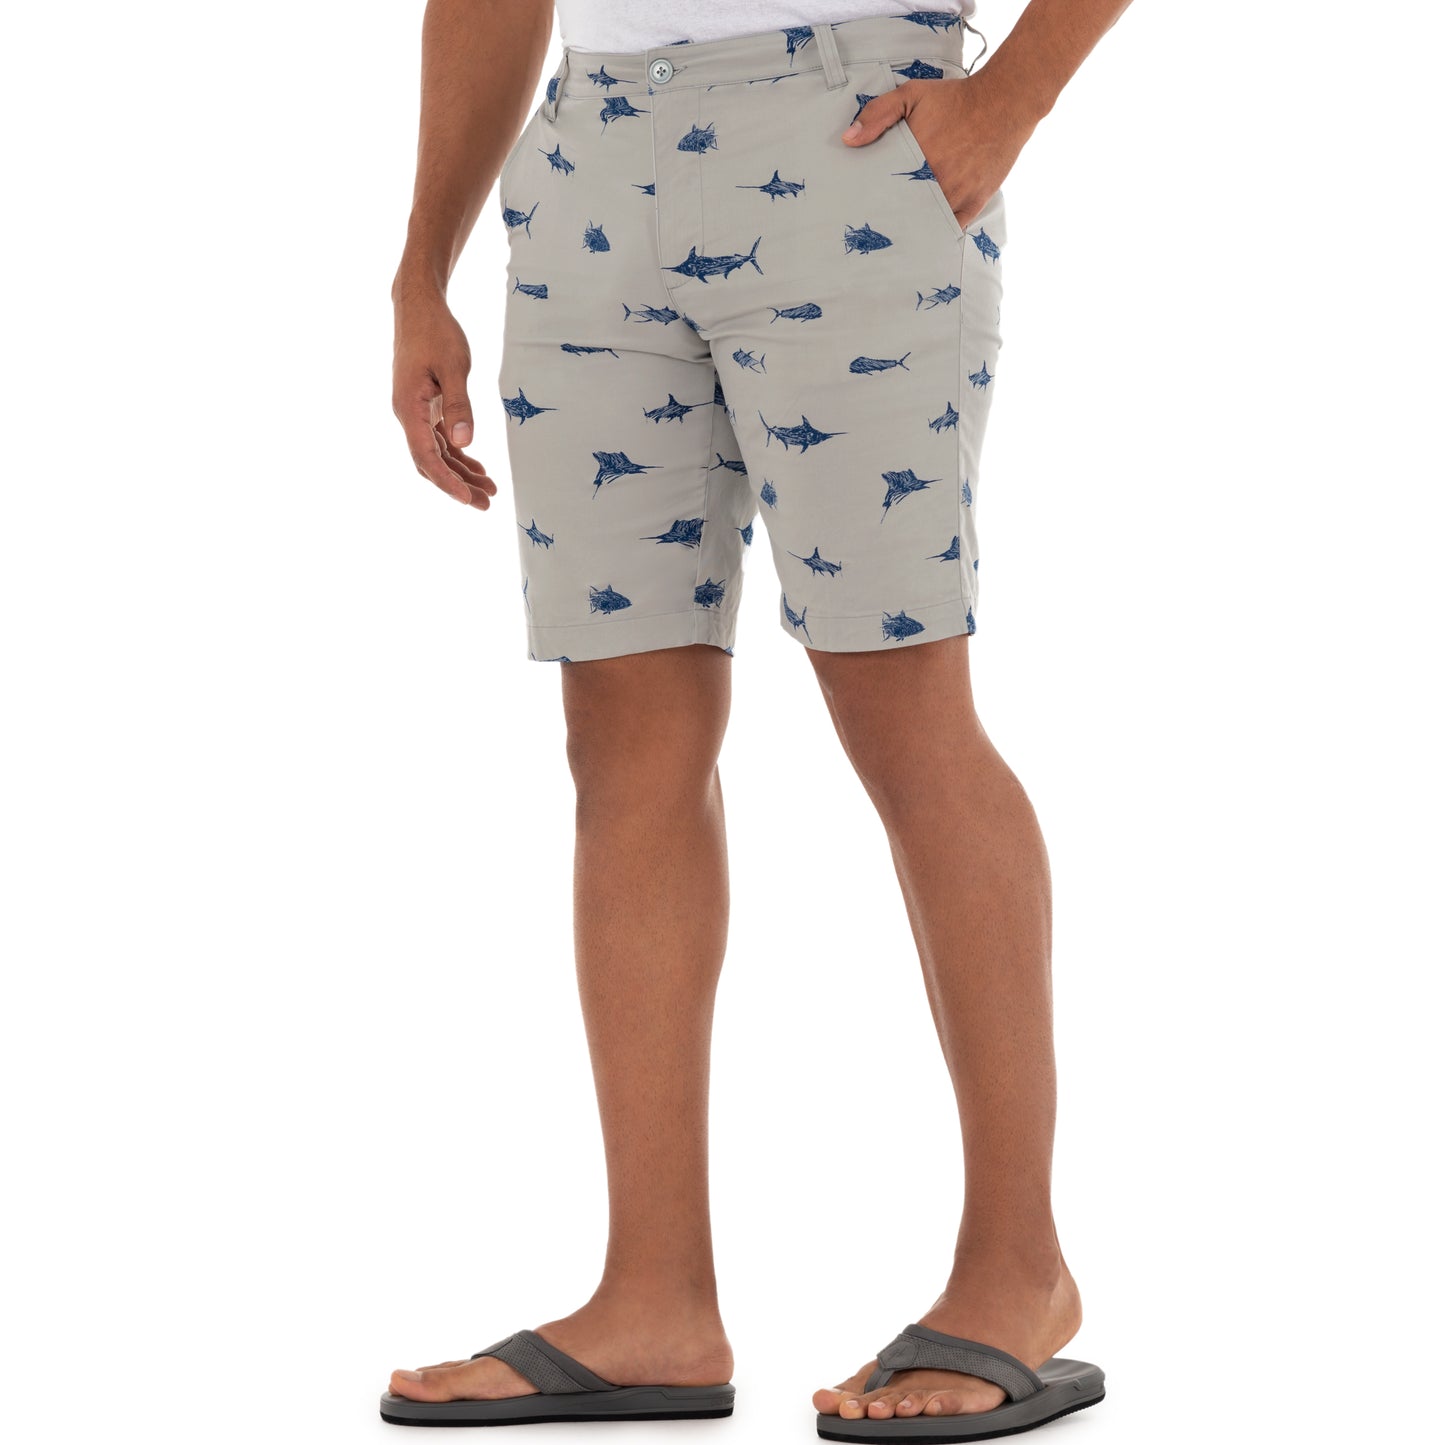 Men's 9" Performance Printed Grey Woven Short View 2